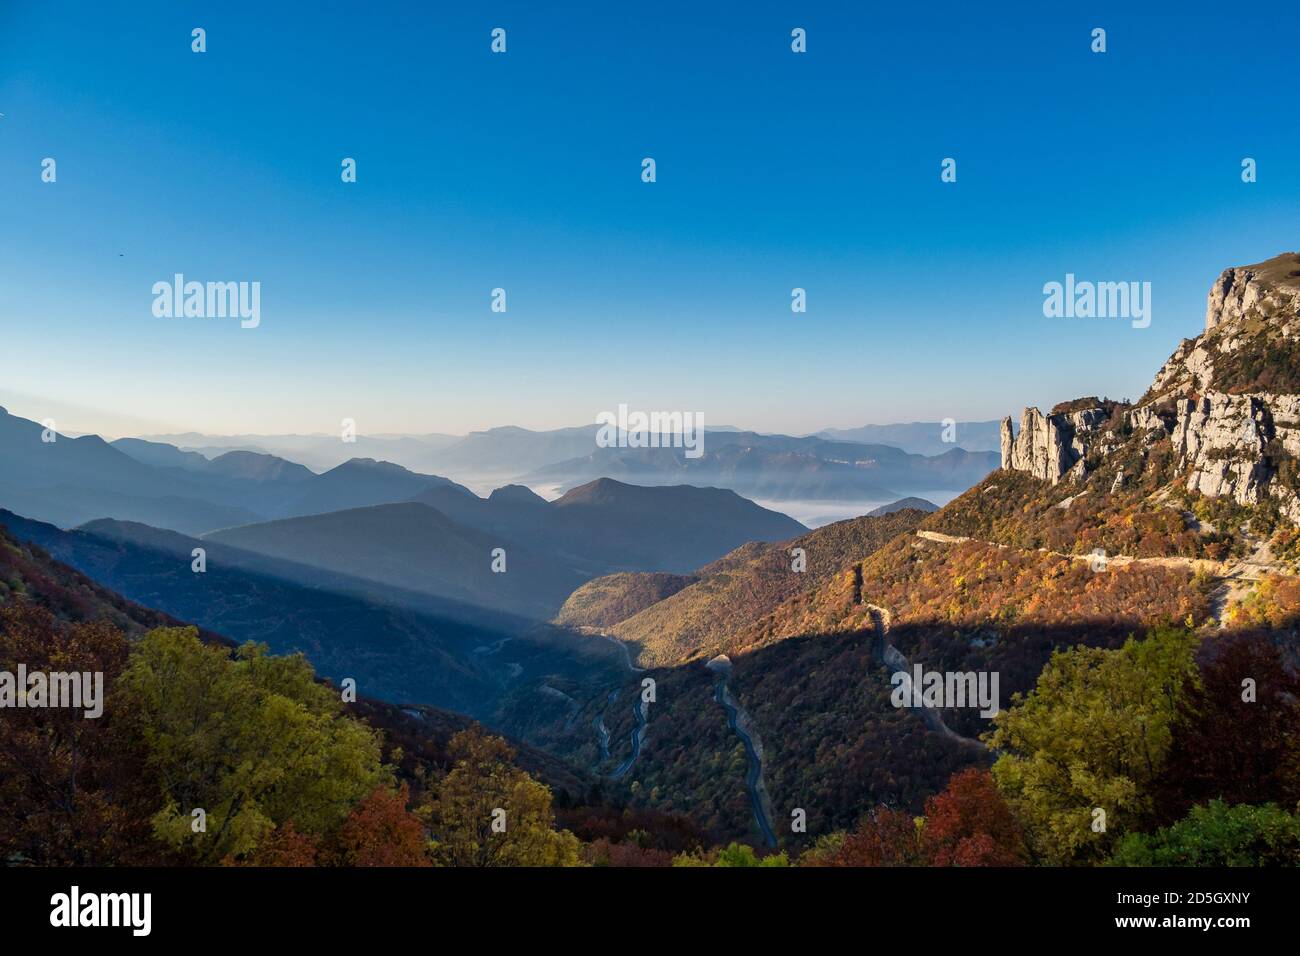 French countryside. Col de Rousset. Panoramic view of the heights of the Vercors, the marly hills and the valley Val de Drome, France Stock Photo